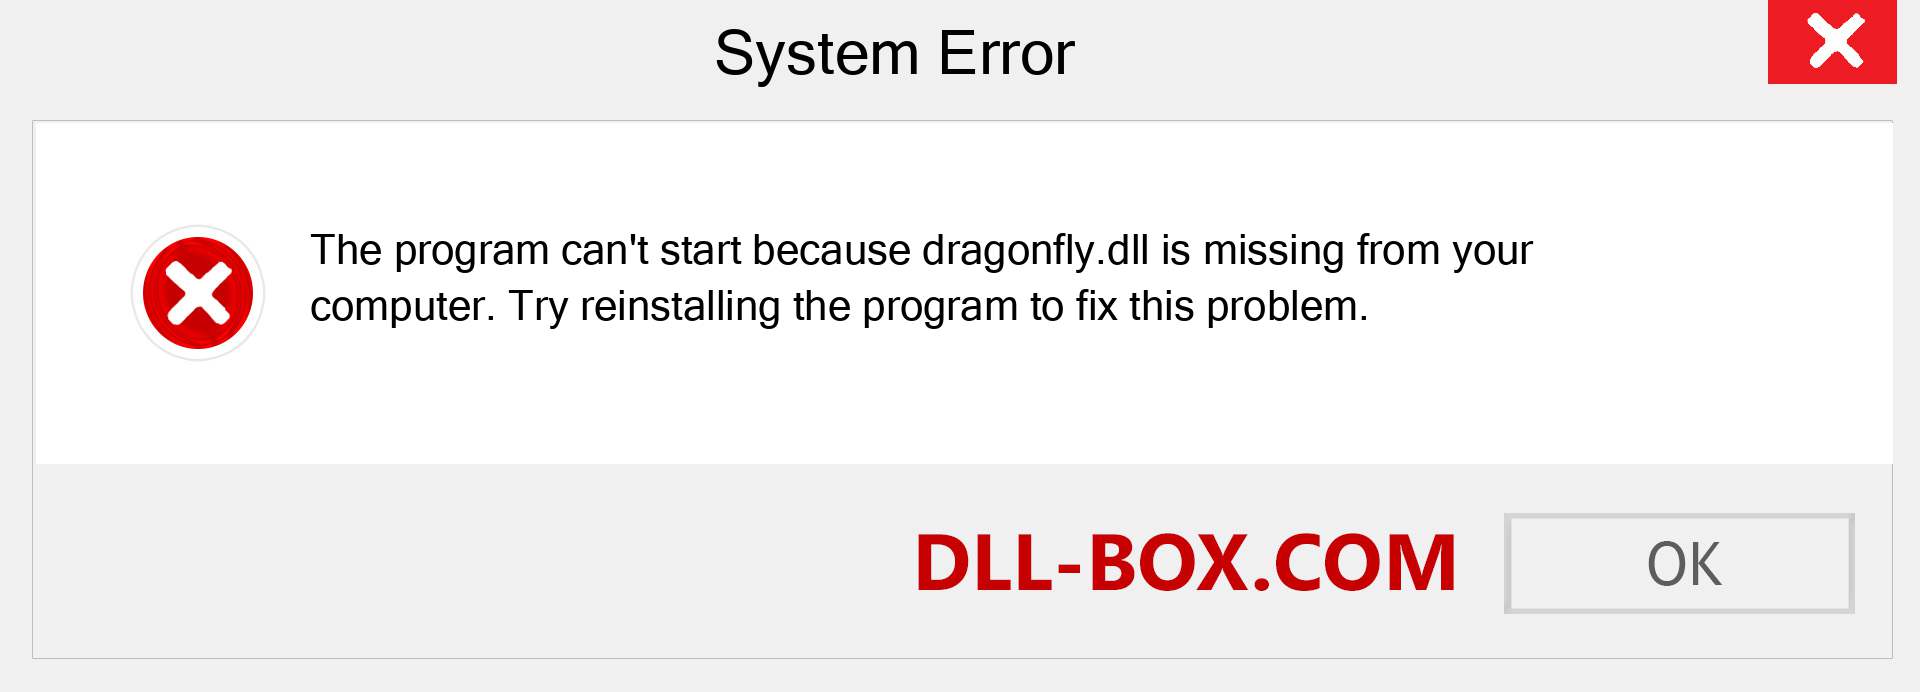  dragonfly.dll file is missing?. Download for Windows 7, 8, 10 - Fix  dragonfly dll Missing Error on Windows, photos, images